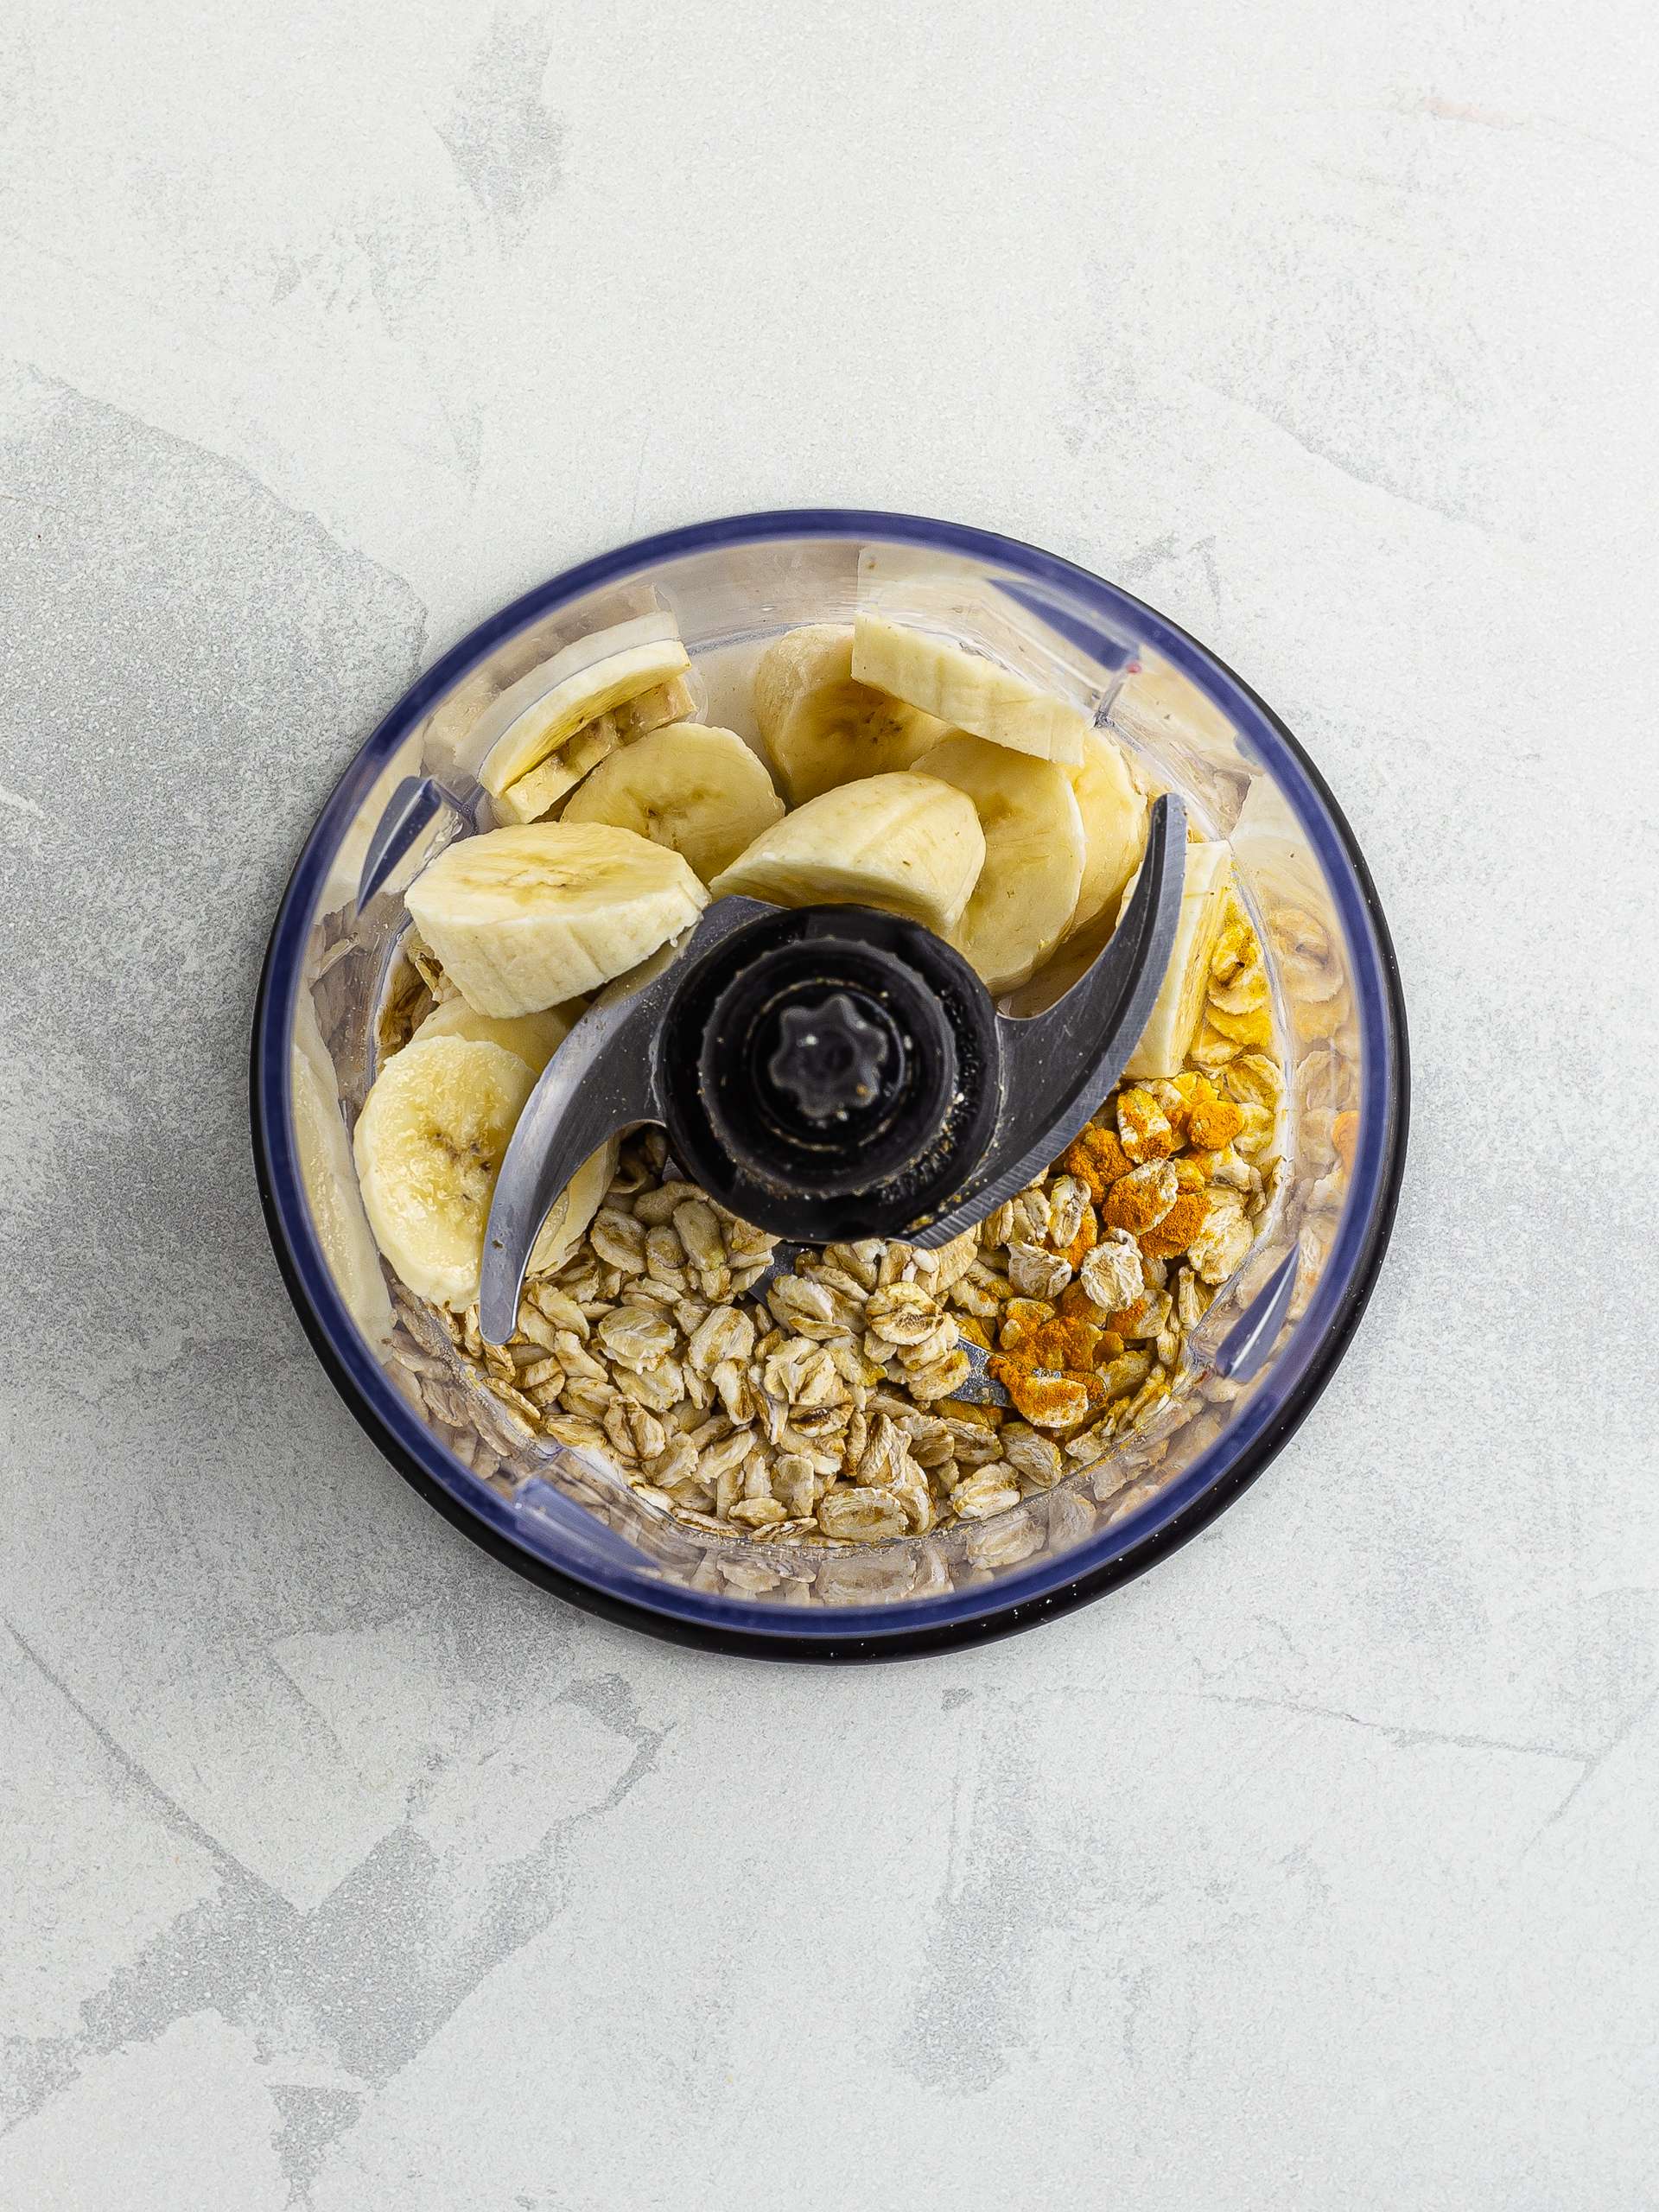 Banana and oats for smoothie